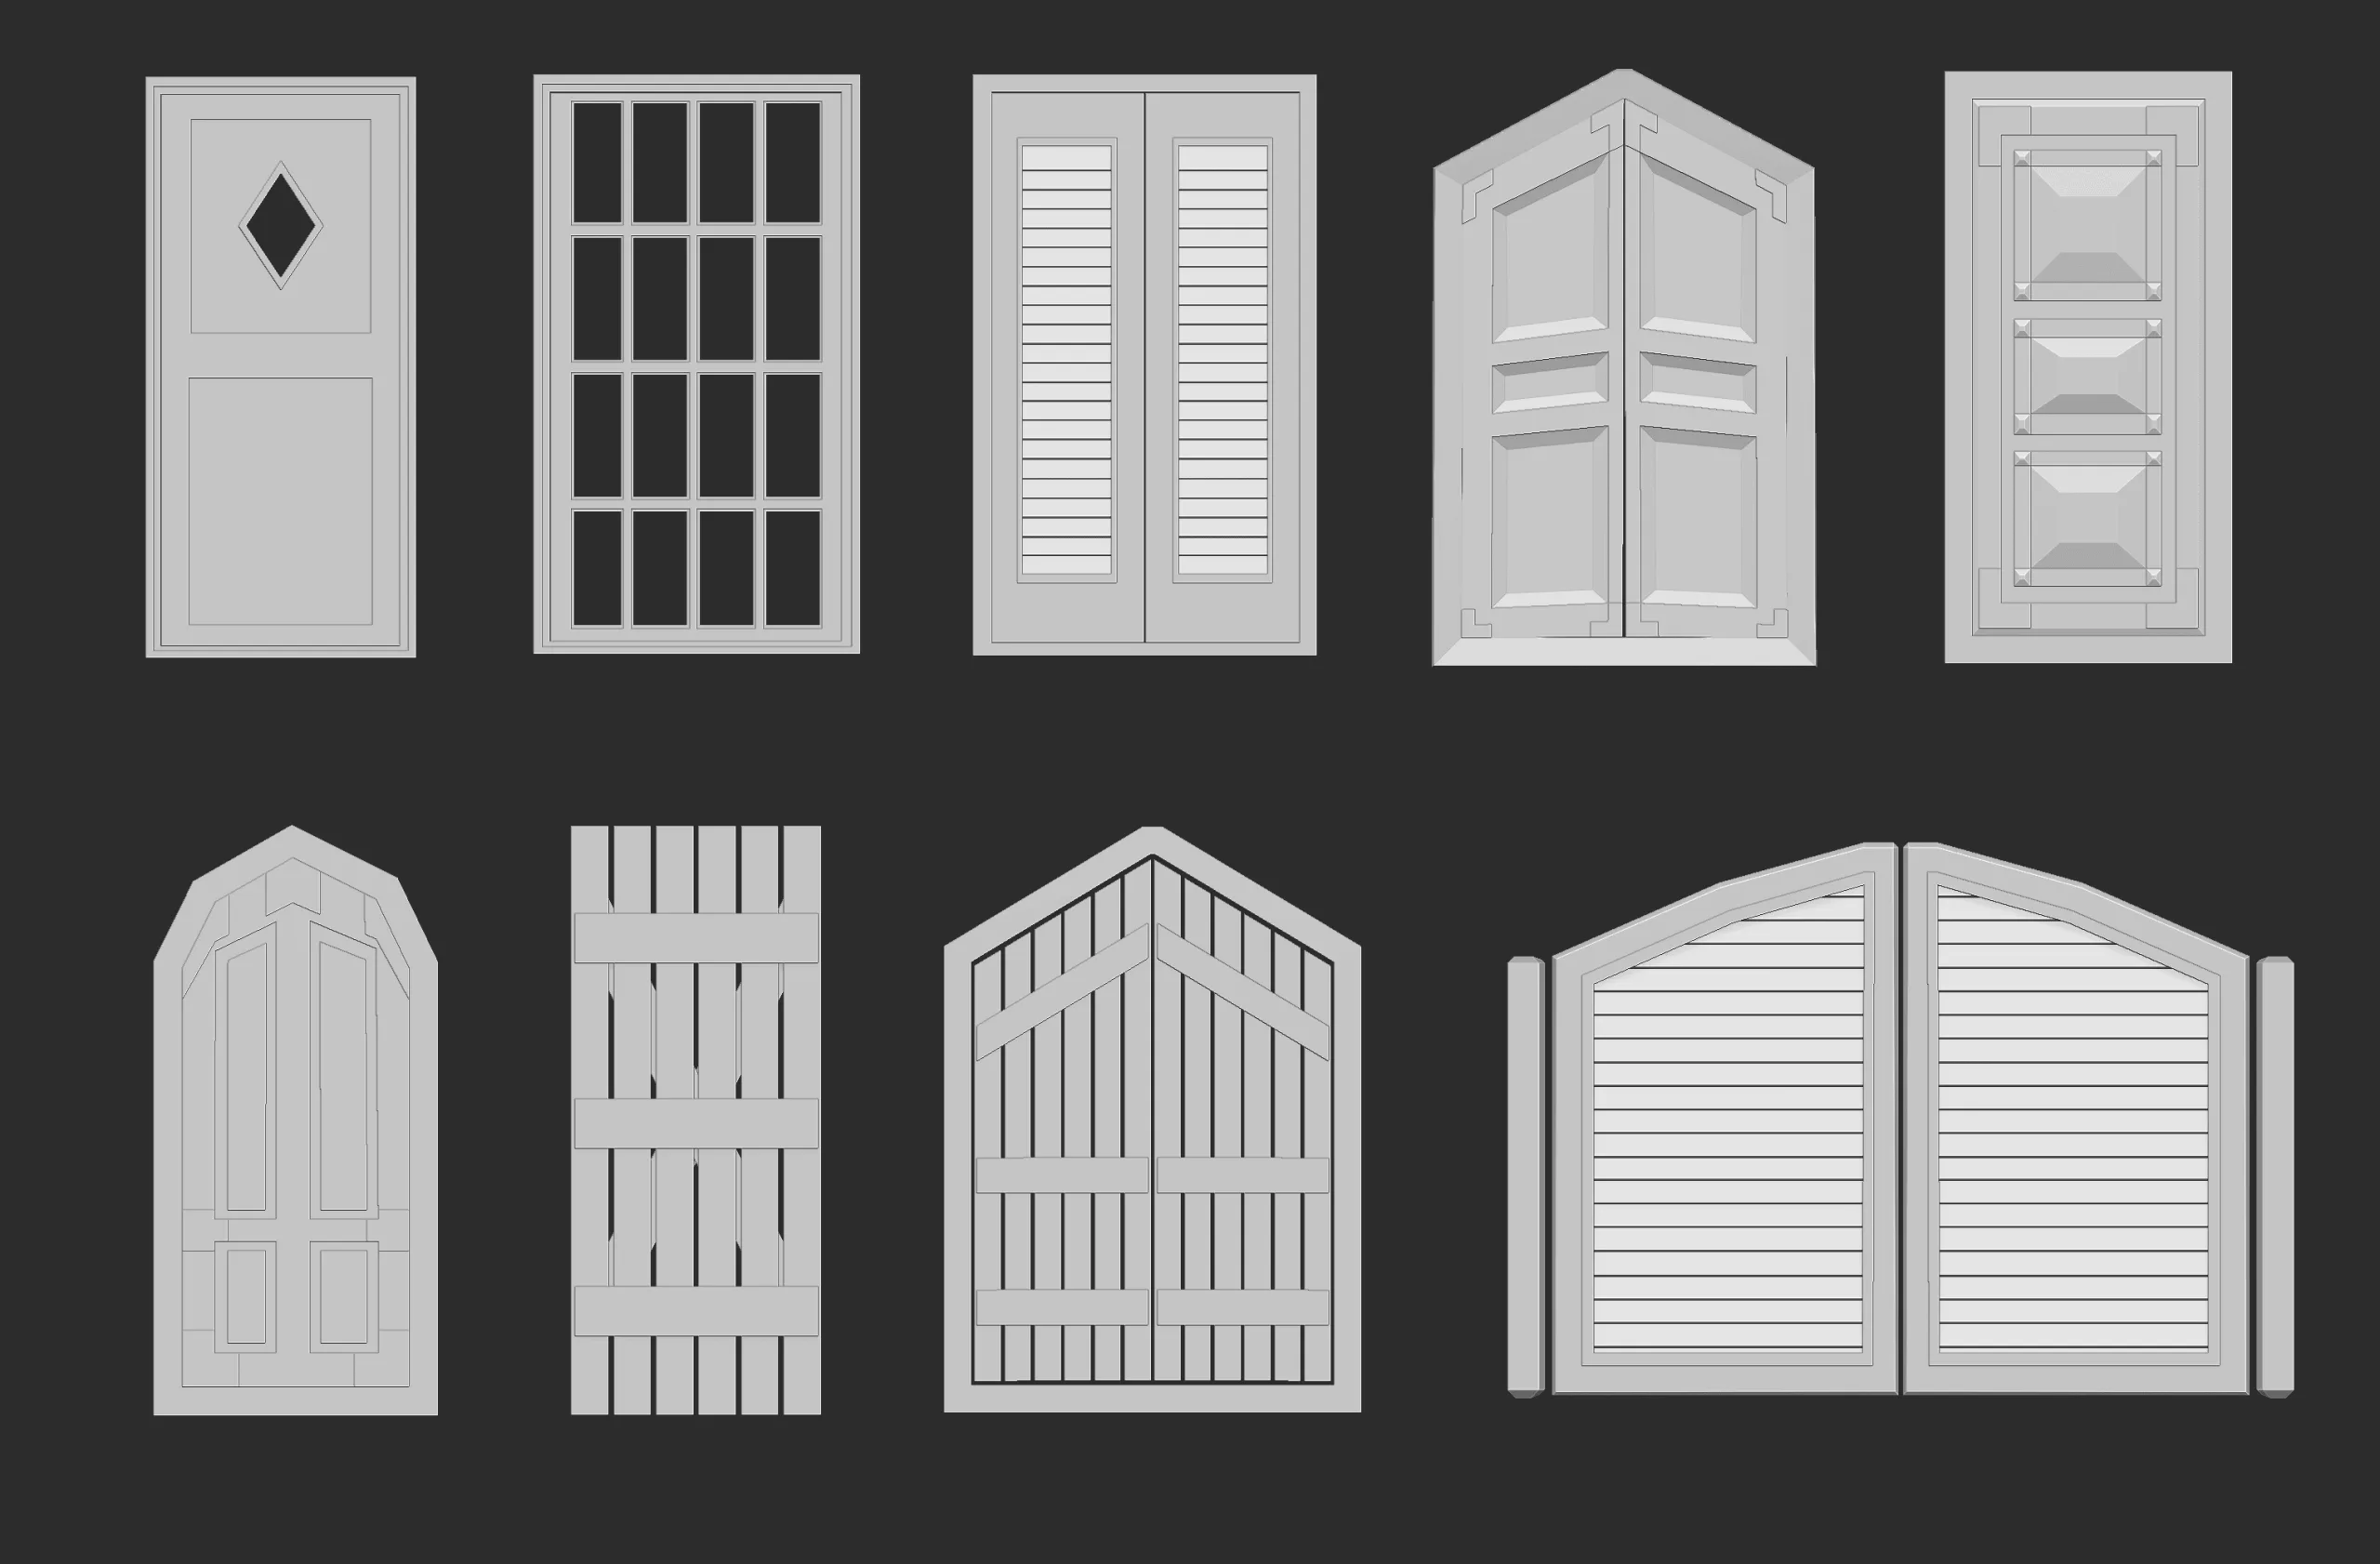 45 low poly interior and exterior door base mesh shapes IMM brush set for Zbrush, obj and fbx files.